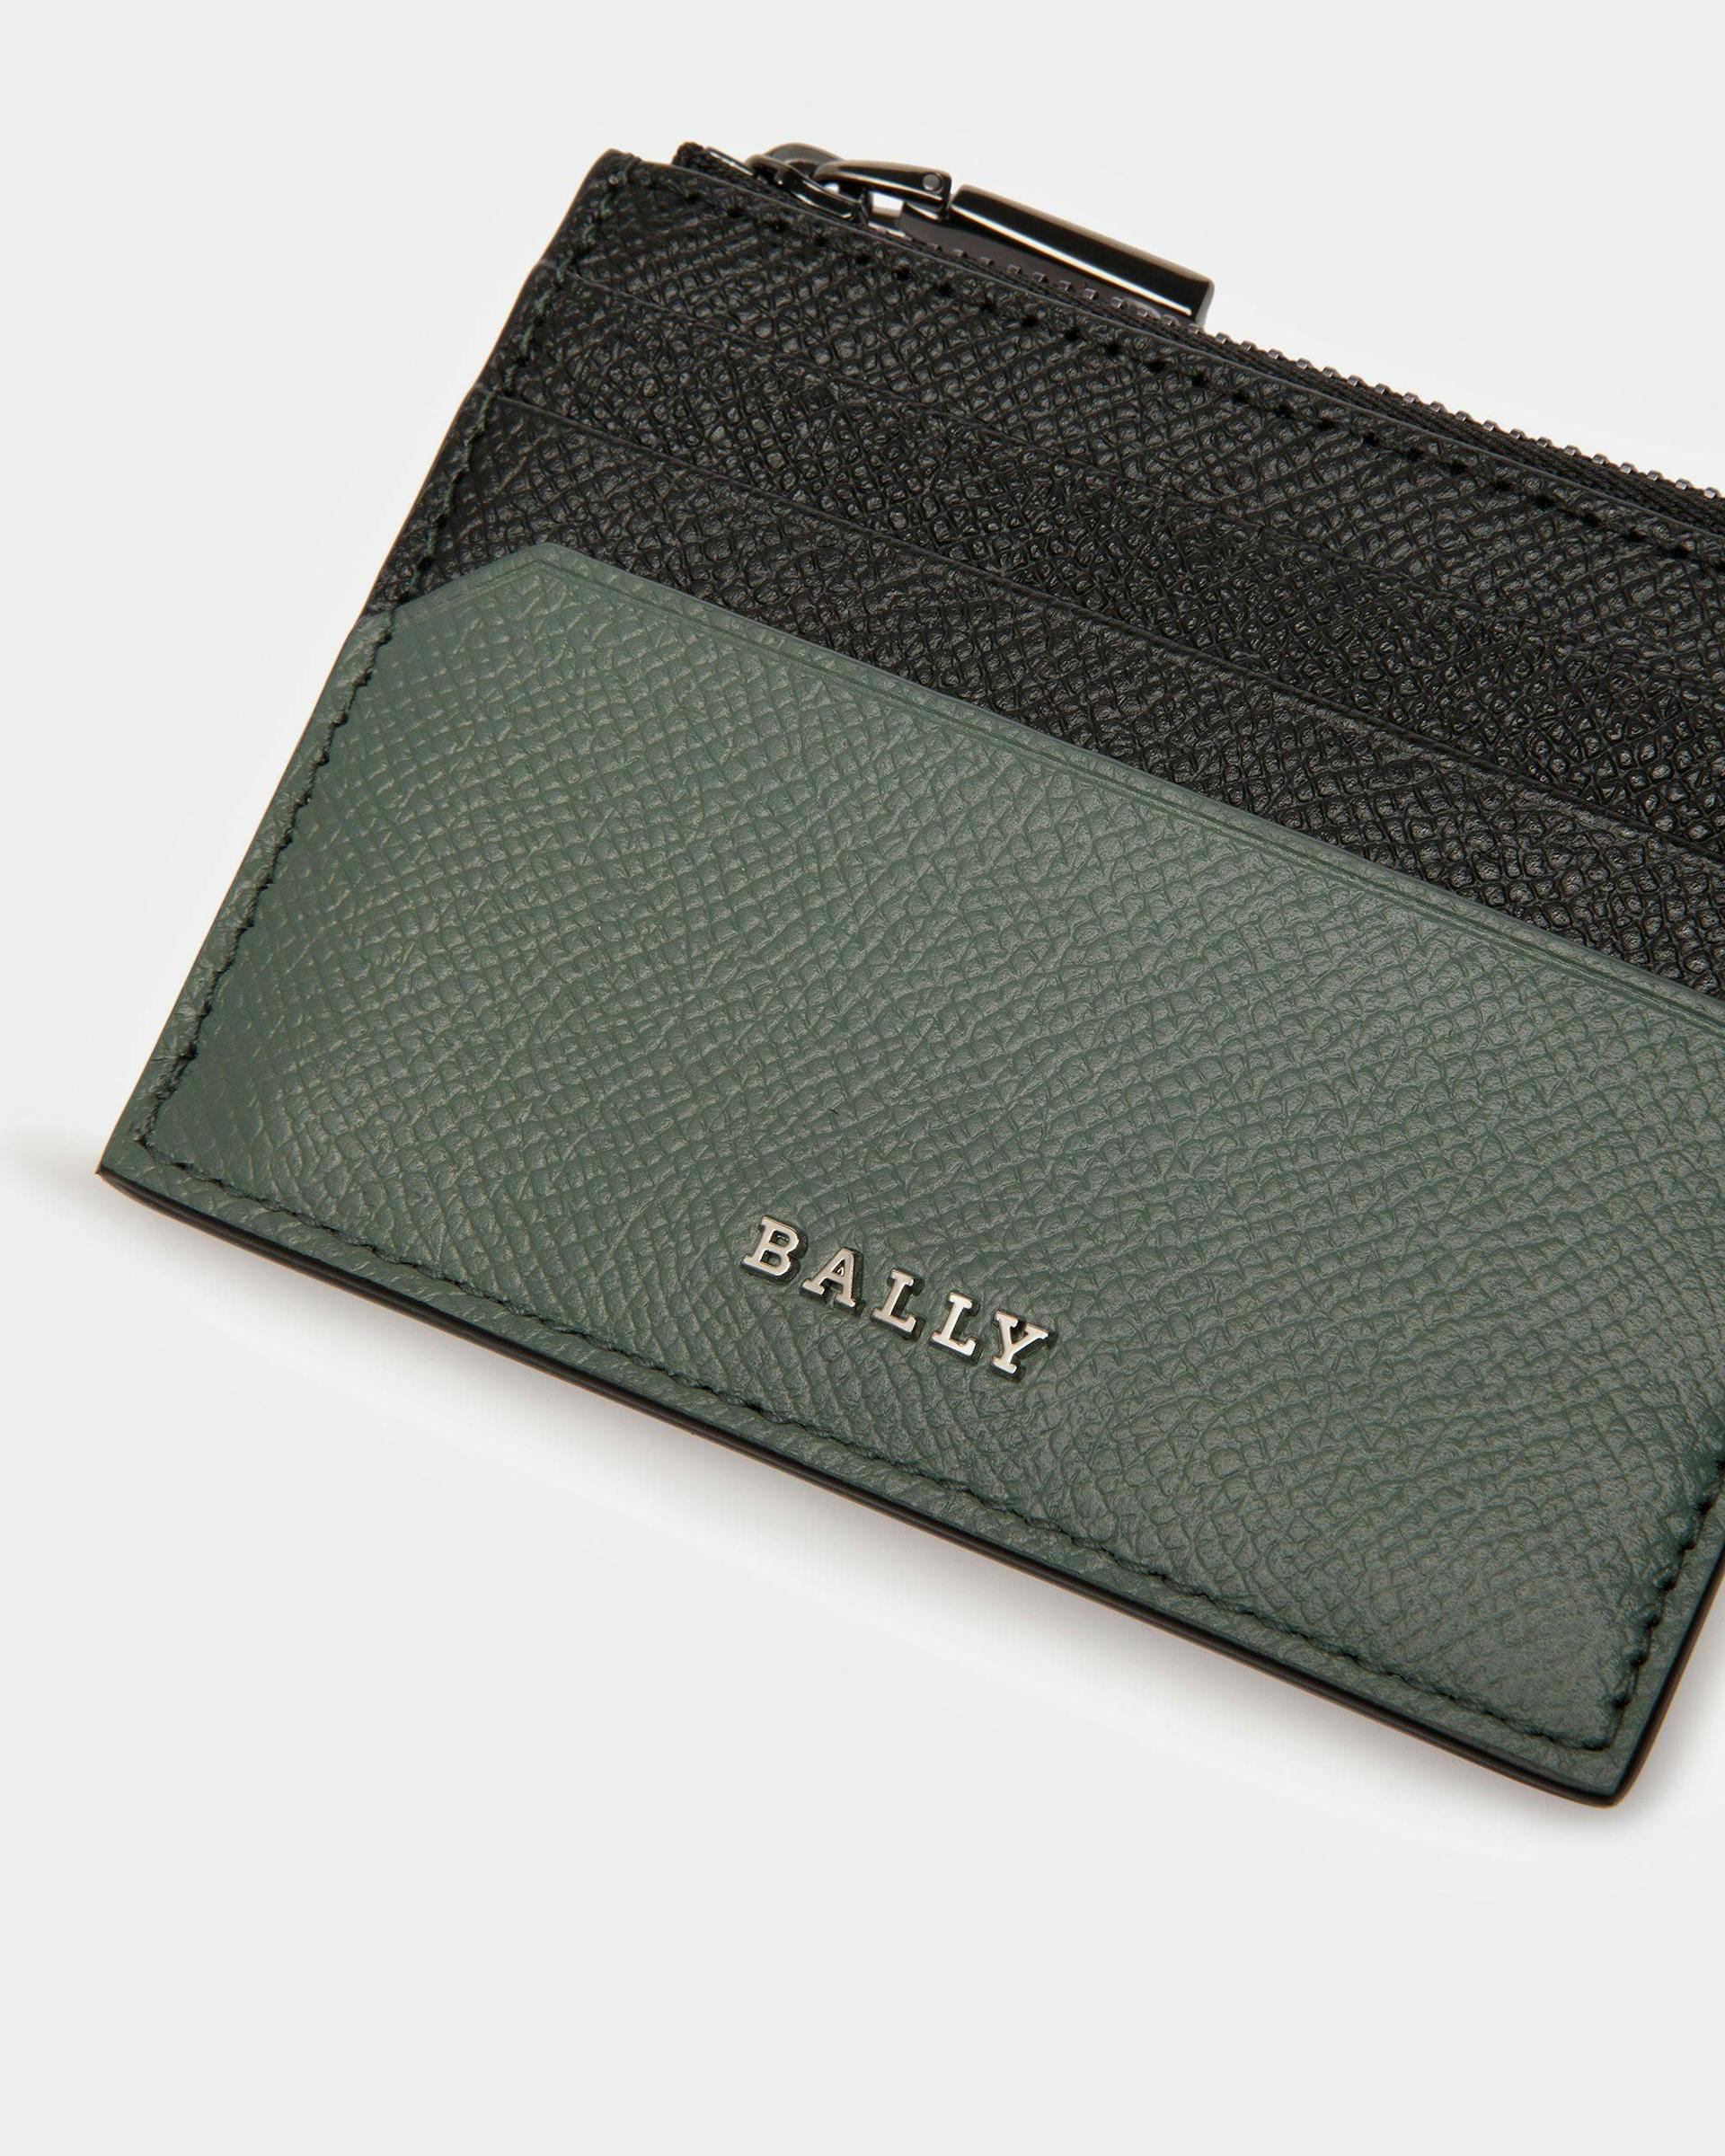 Byrion Leather Business Card Holder In Black And Sage - Men's - Bally - 03